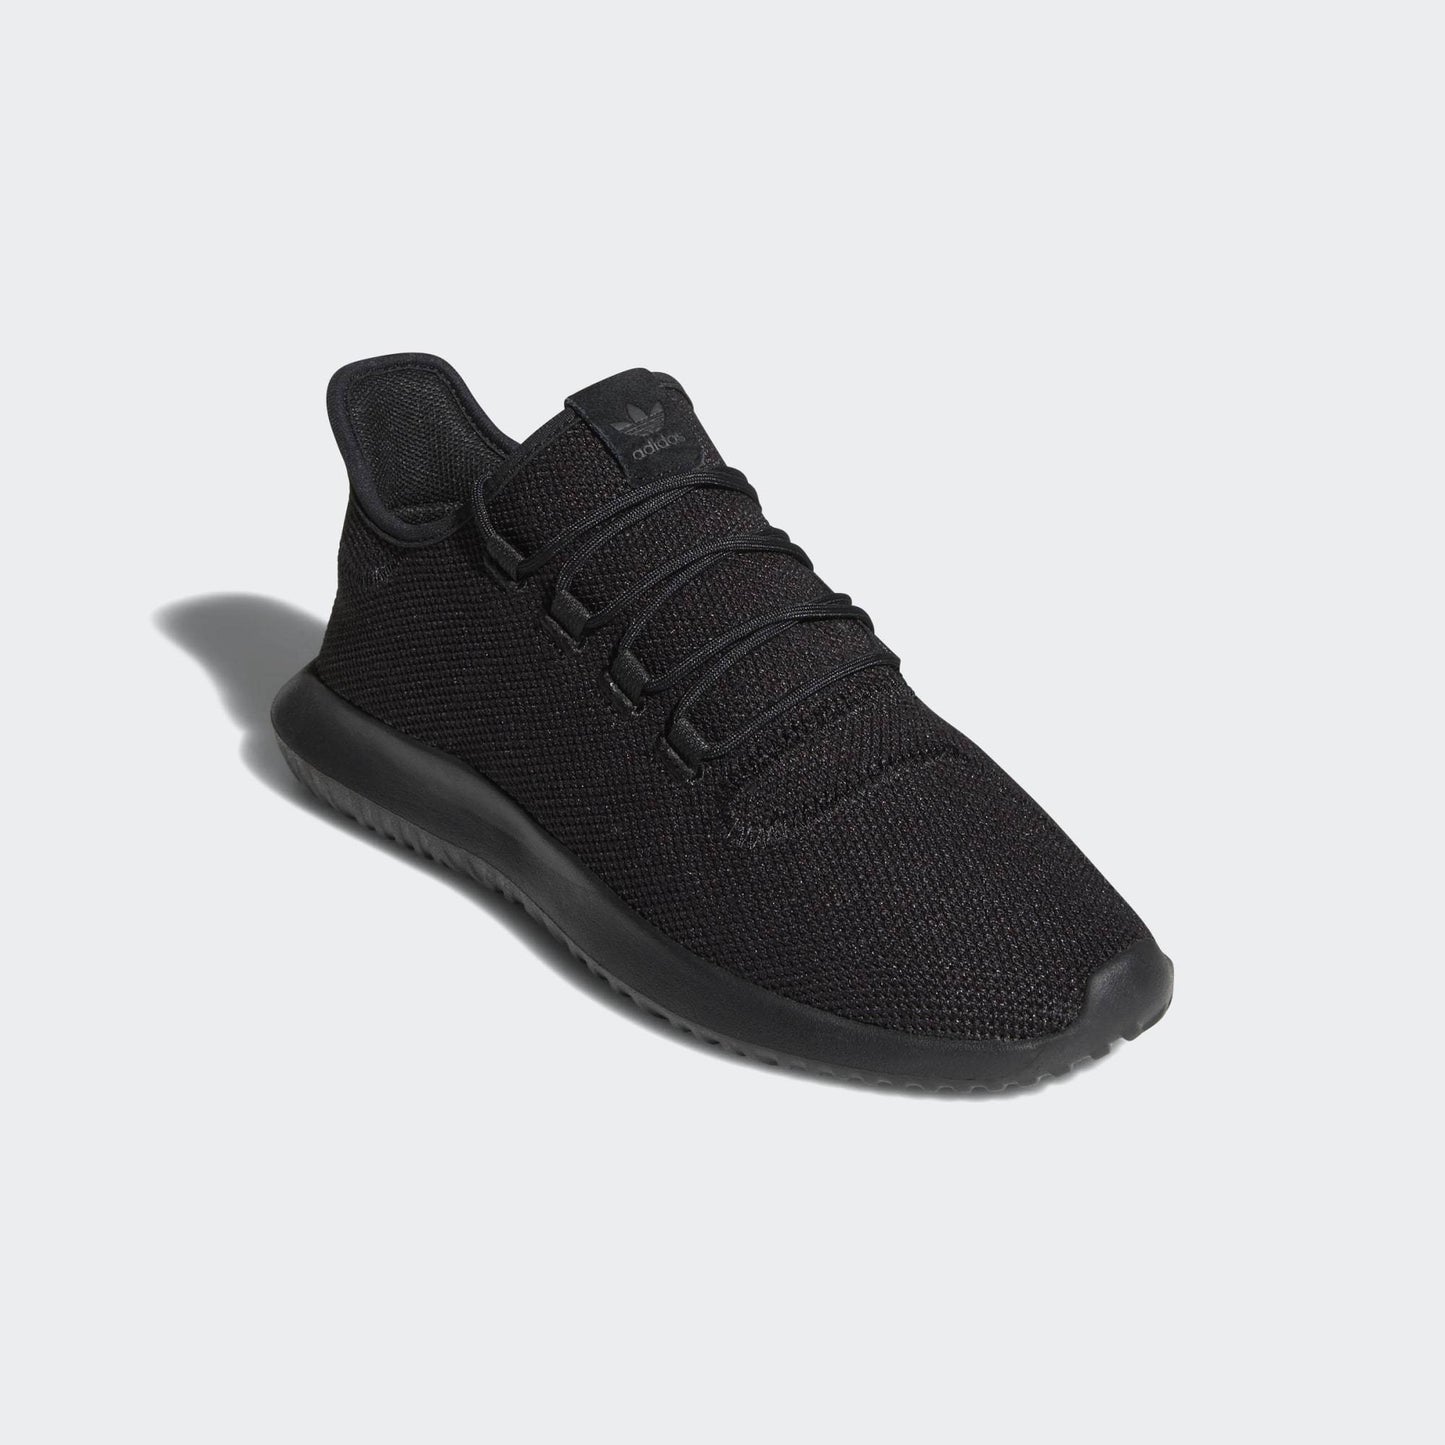 TUBULAR SHADOW SHOES - Discount Store